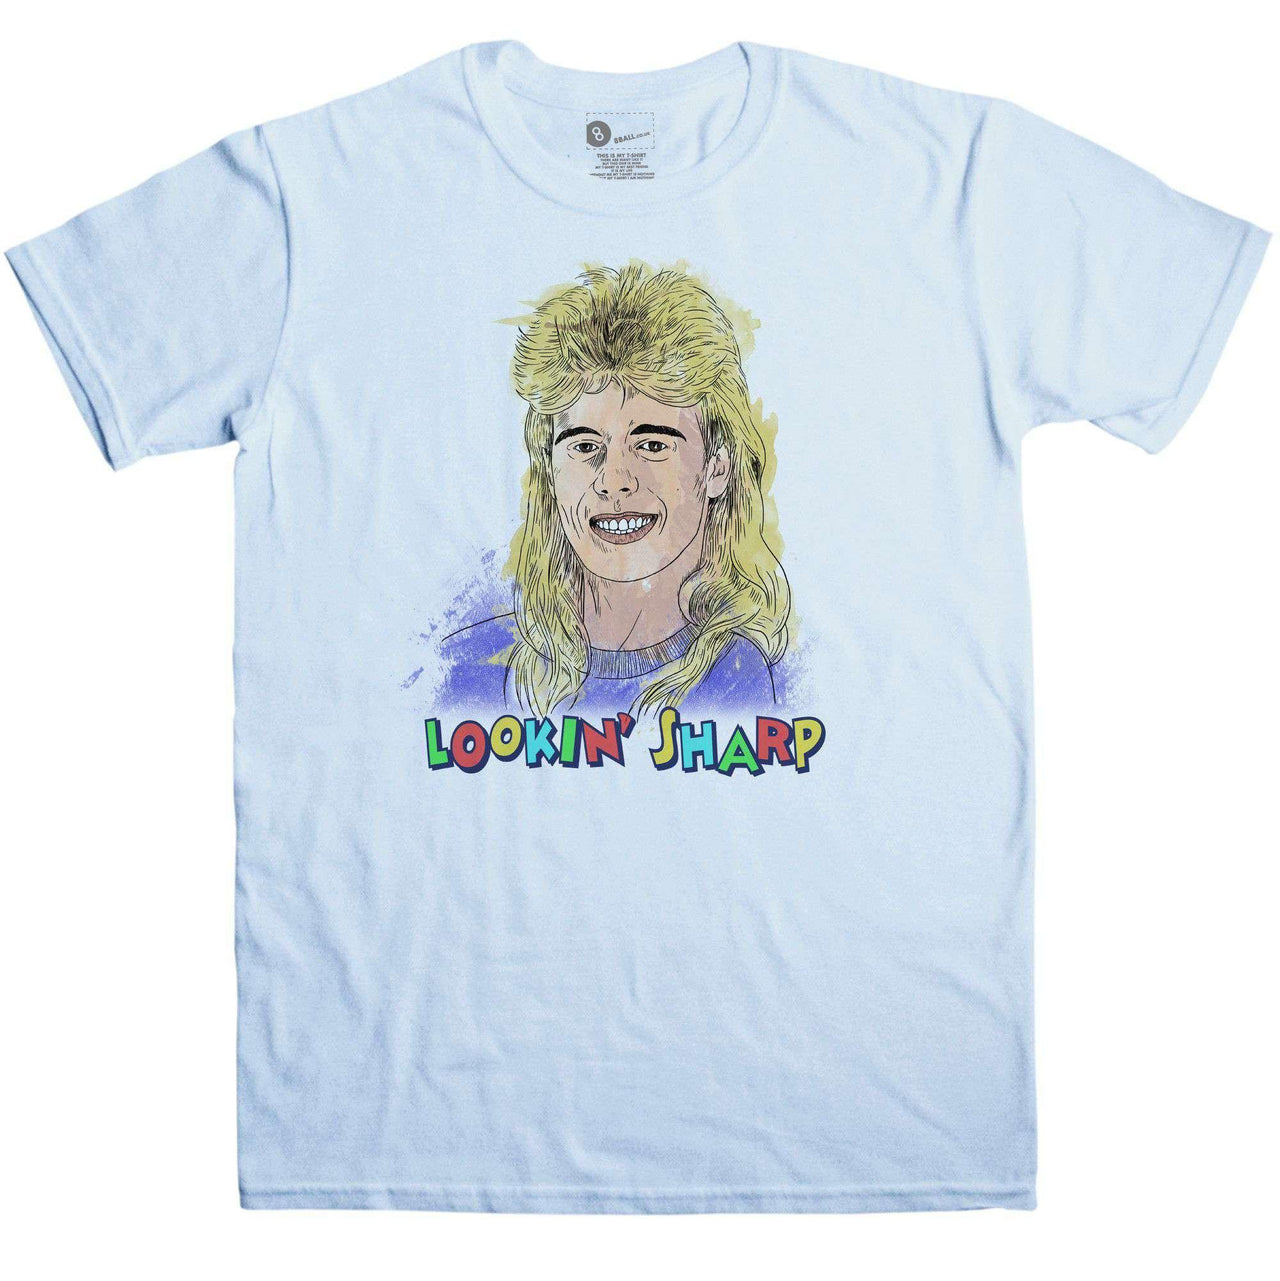 Pat Sharp Unisex T-Shirt For Men And Women, Inspired By Fun House 8Ball